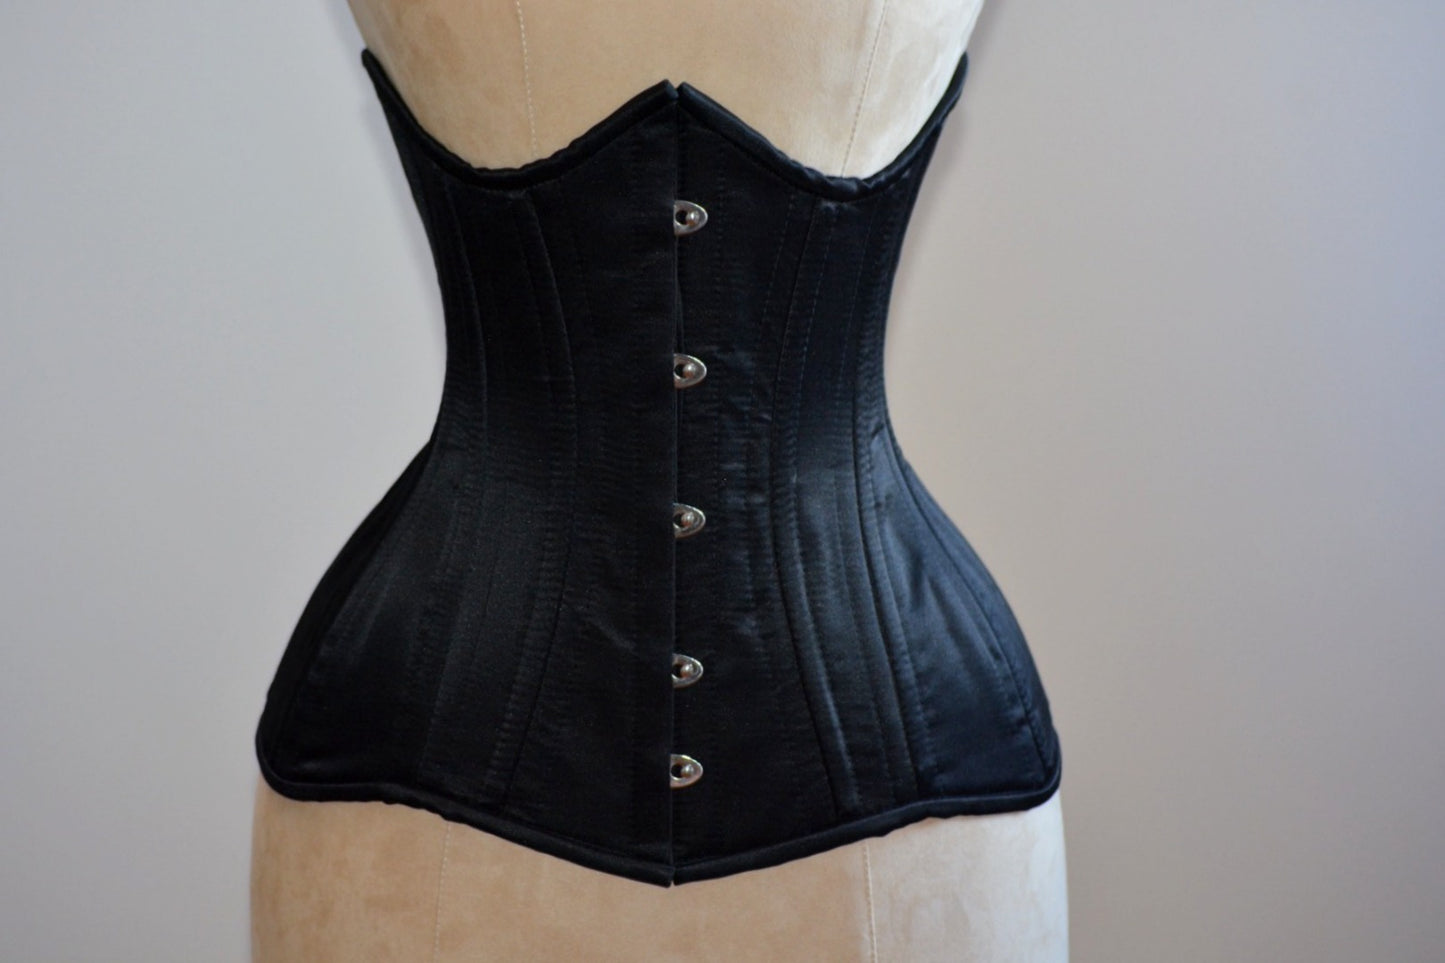 Embrace Timeless Elegance: The Underbust Classic Corset from Corsettery